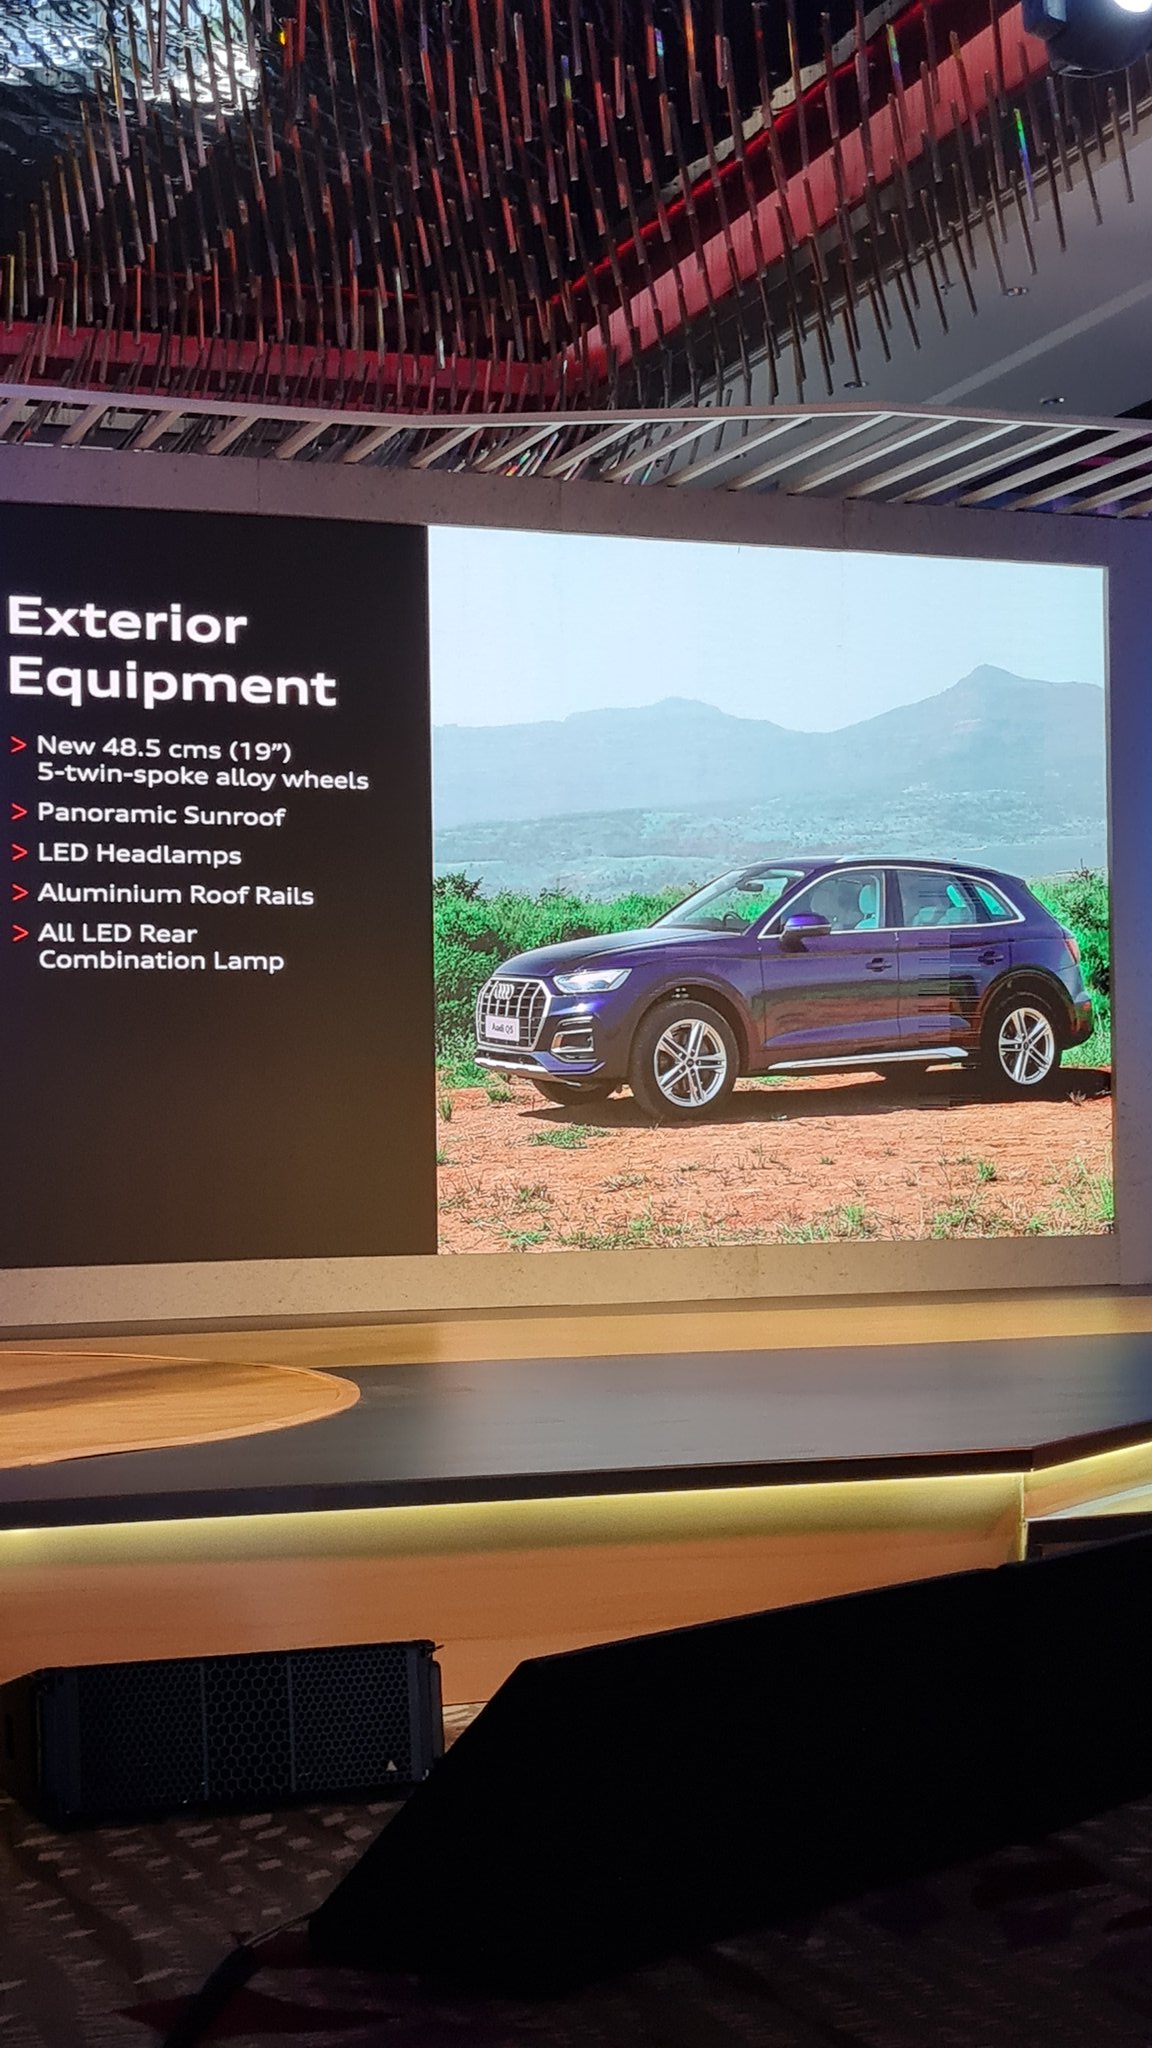 <p>The Audi Q5&nbsp;facelift has&nbsp;updated styling in line with new-gen models like the Q8. Changes include a new grille, new LED&nbsp;lighting, upsized wheels&nbsp;amongst others.</p>